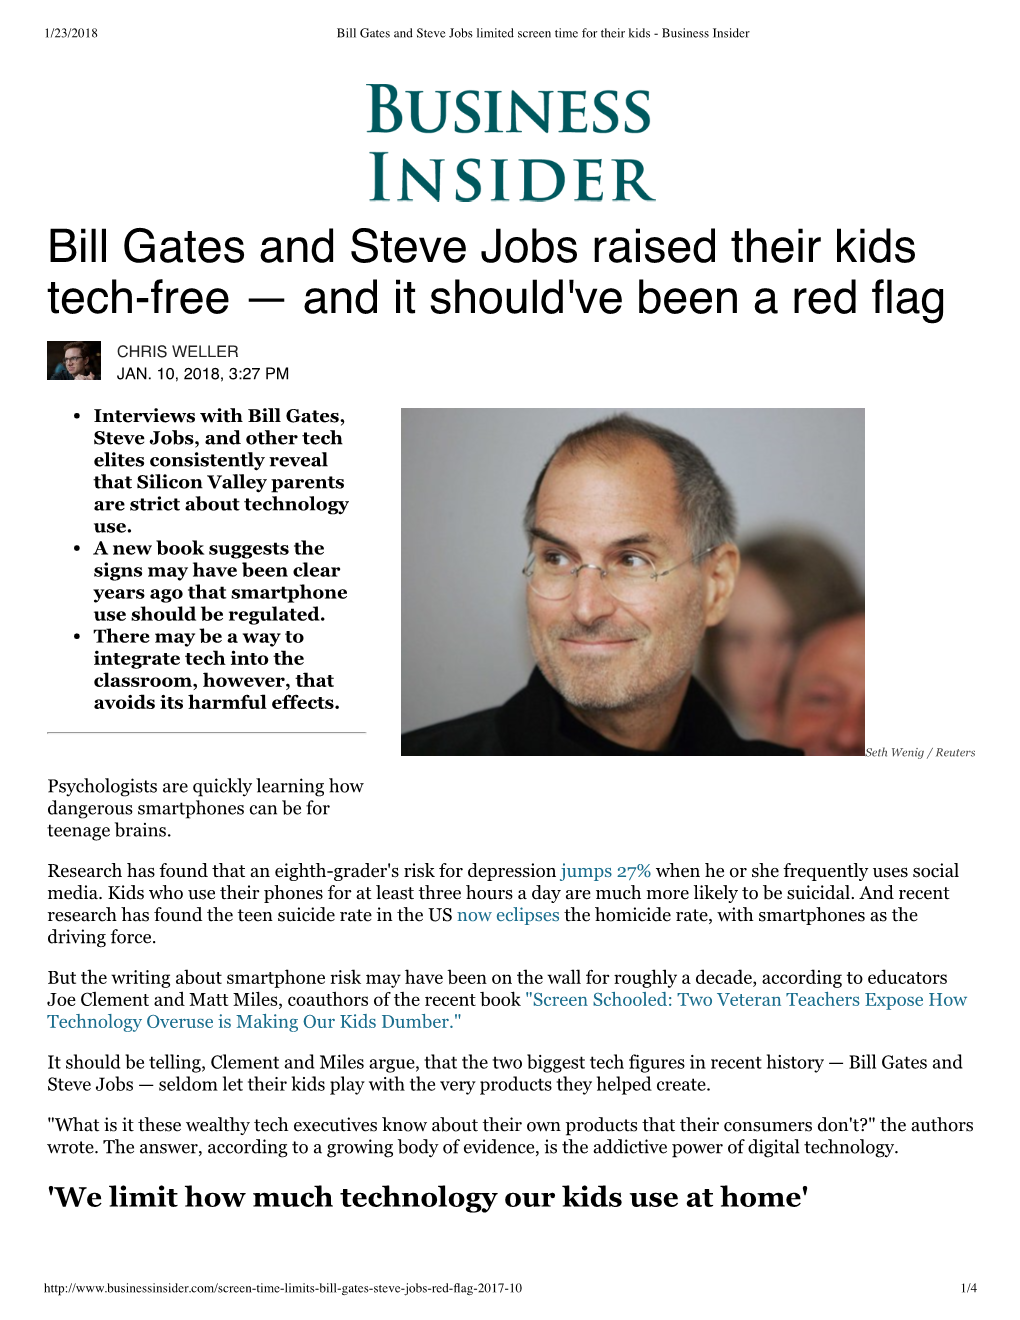 Bill Gates and Steve Jobs Limited Screen Time for Their Kids - Business Insider